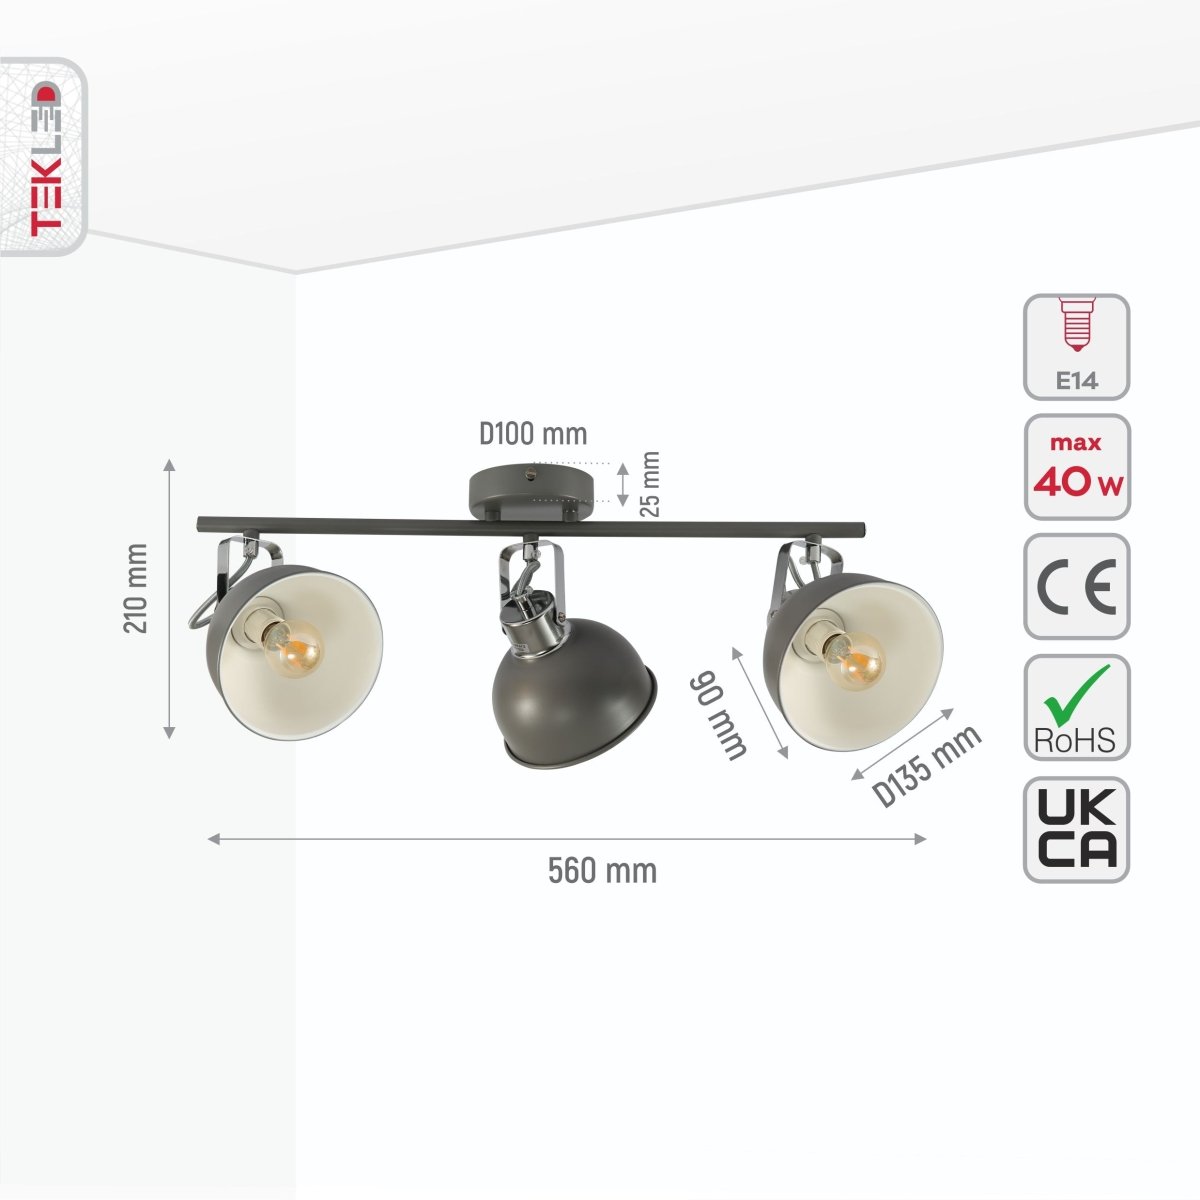 Size and specs of Wall and Ceiling Light Dome Chrome and Grey on Rod and Puck Rose 3xE14 | TEKLED 159-17784